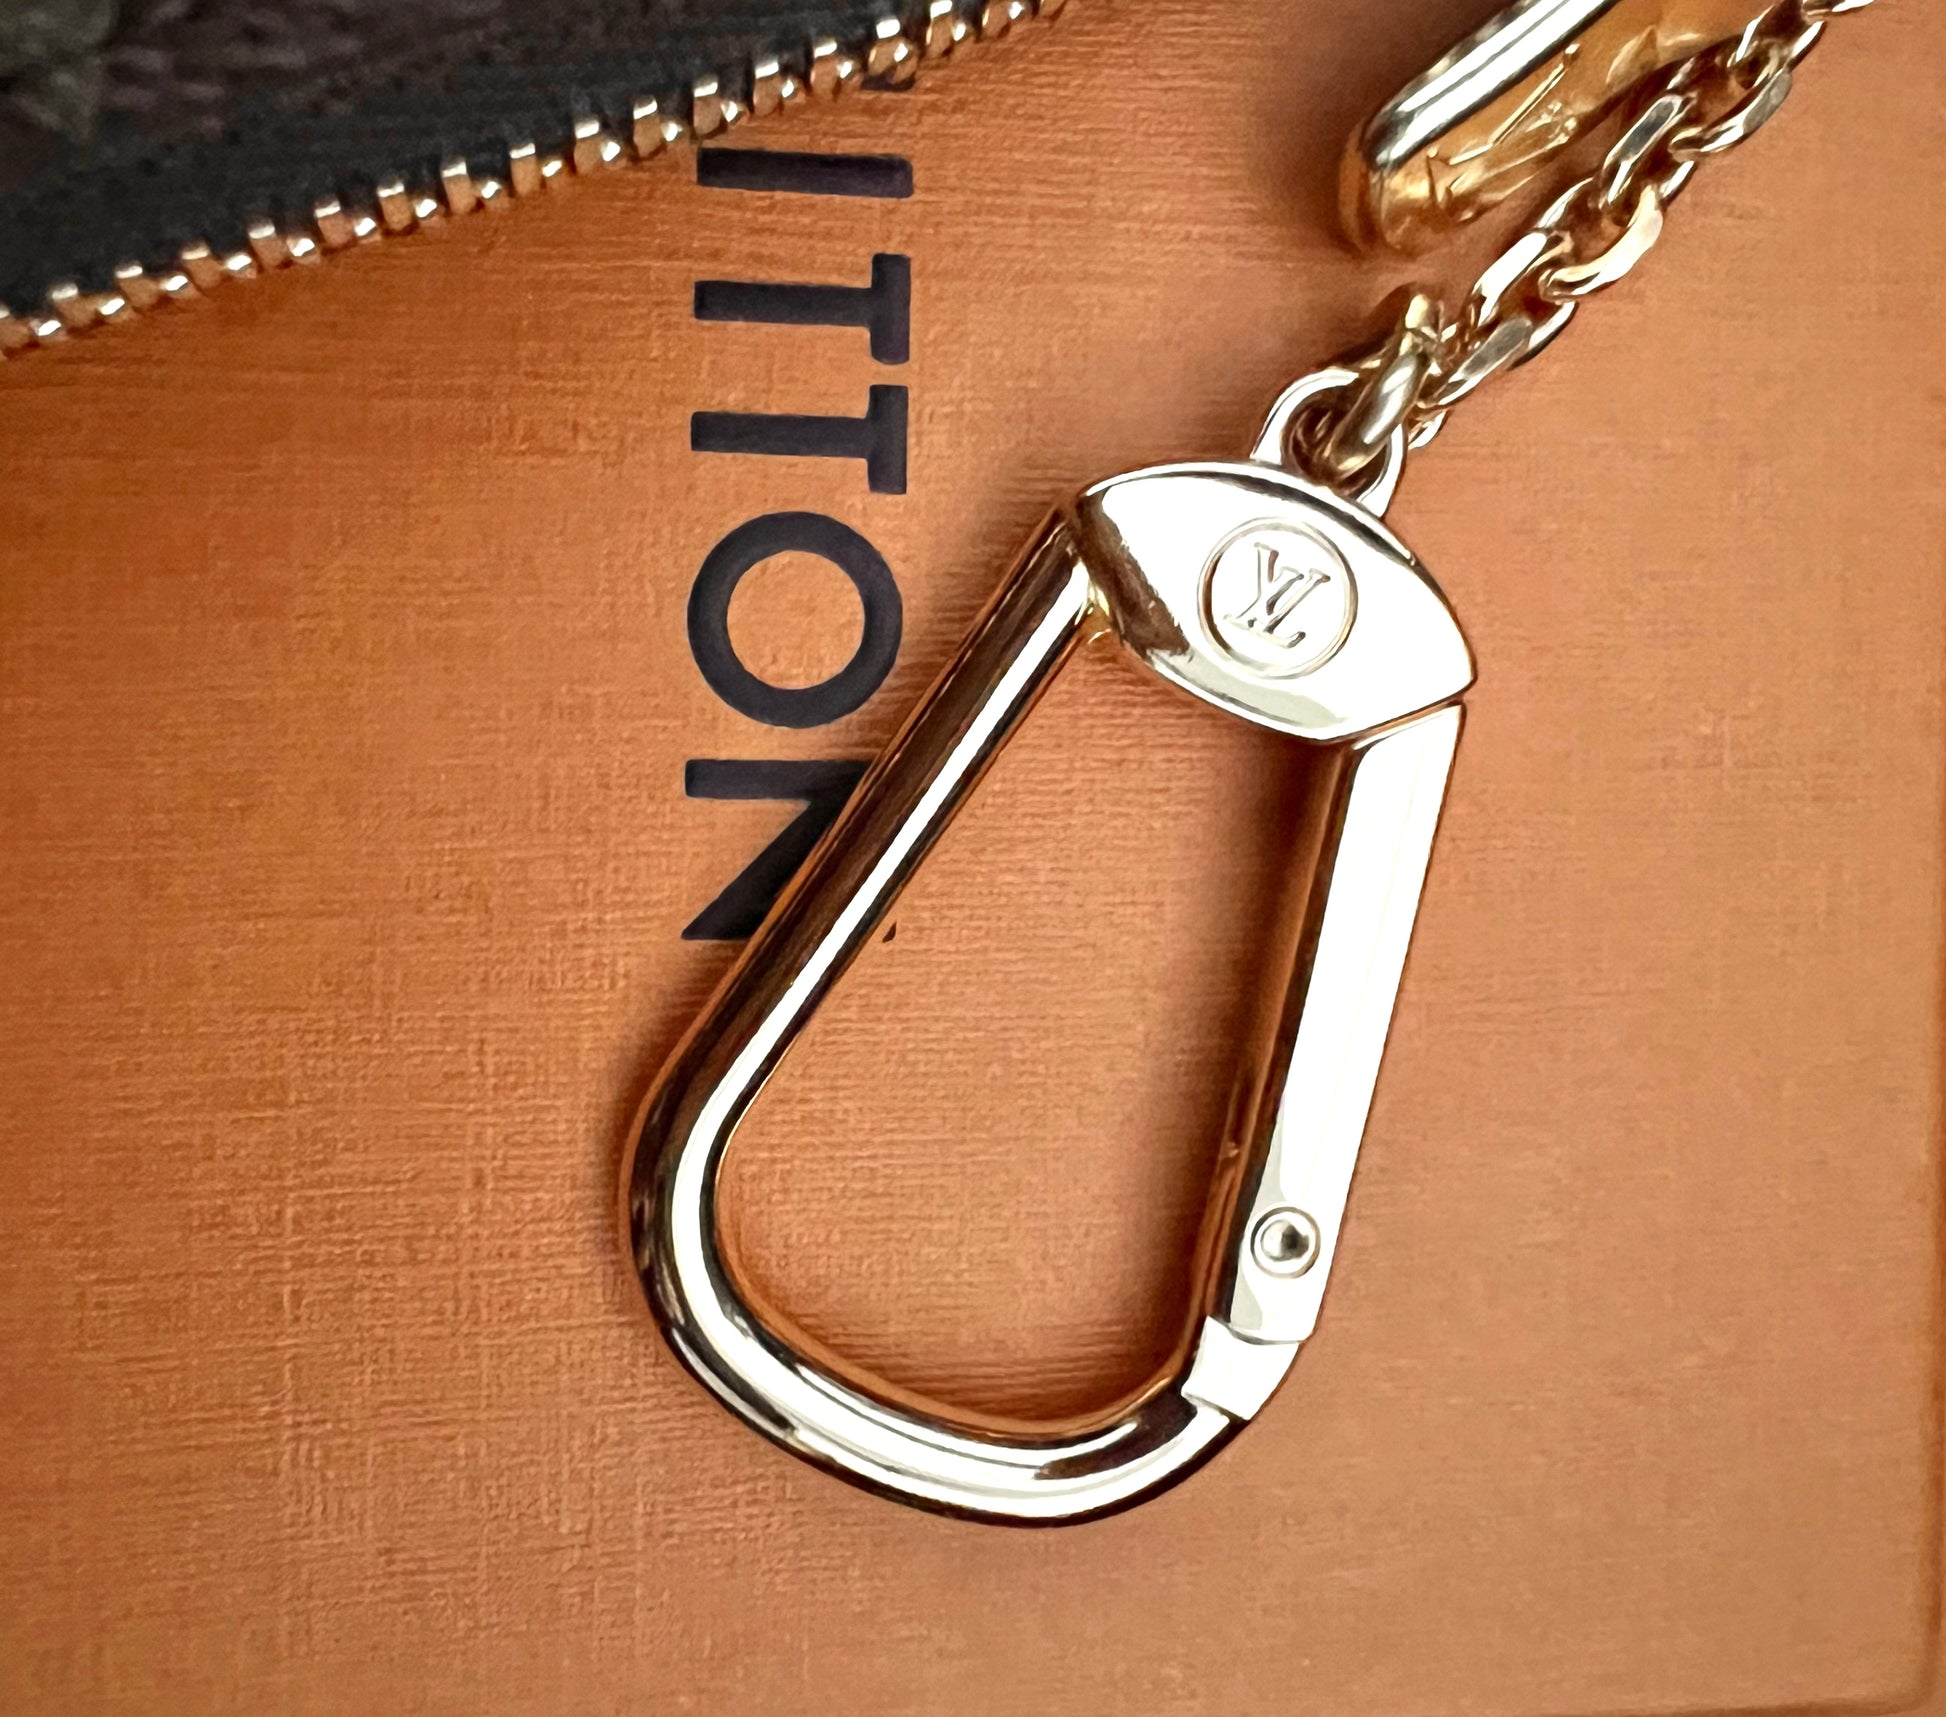 LATEST RELEASE FROM LOUIS VUITTON/HOLIDAY ANIMATION BAG & KEY